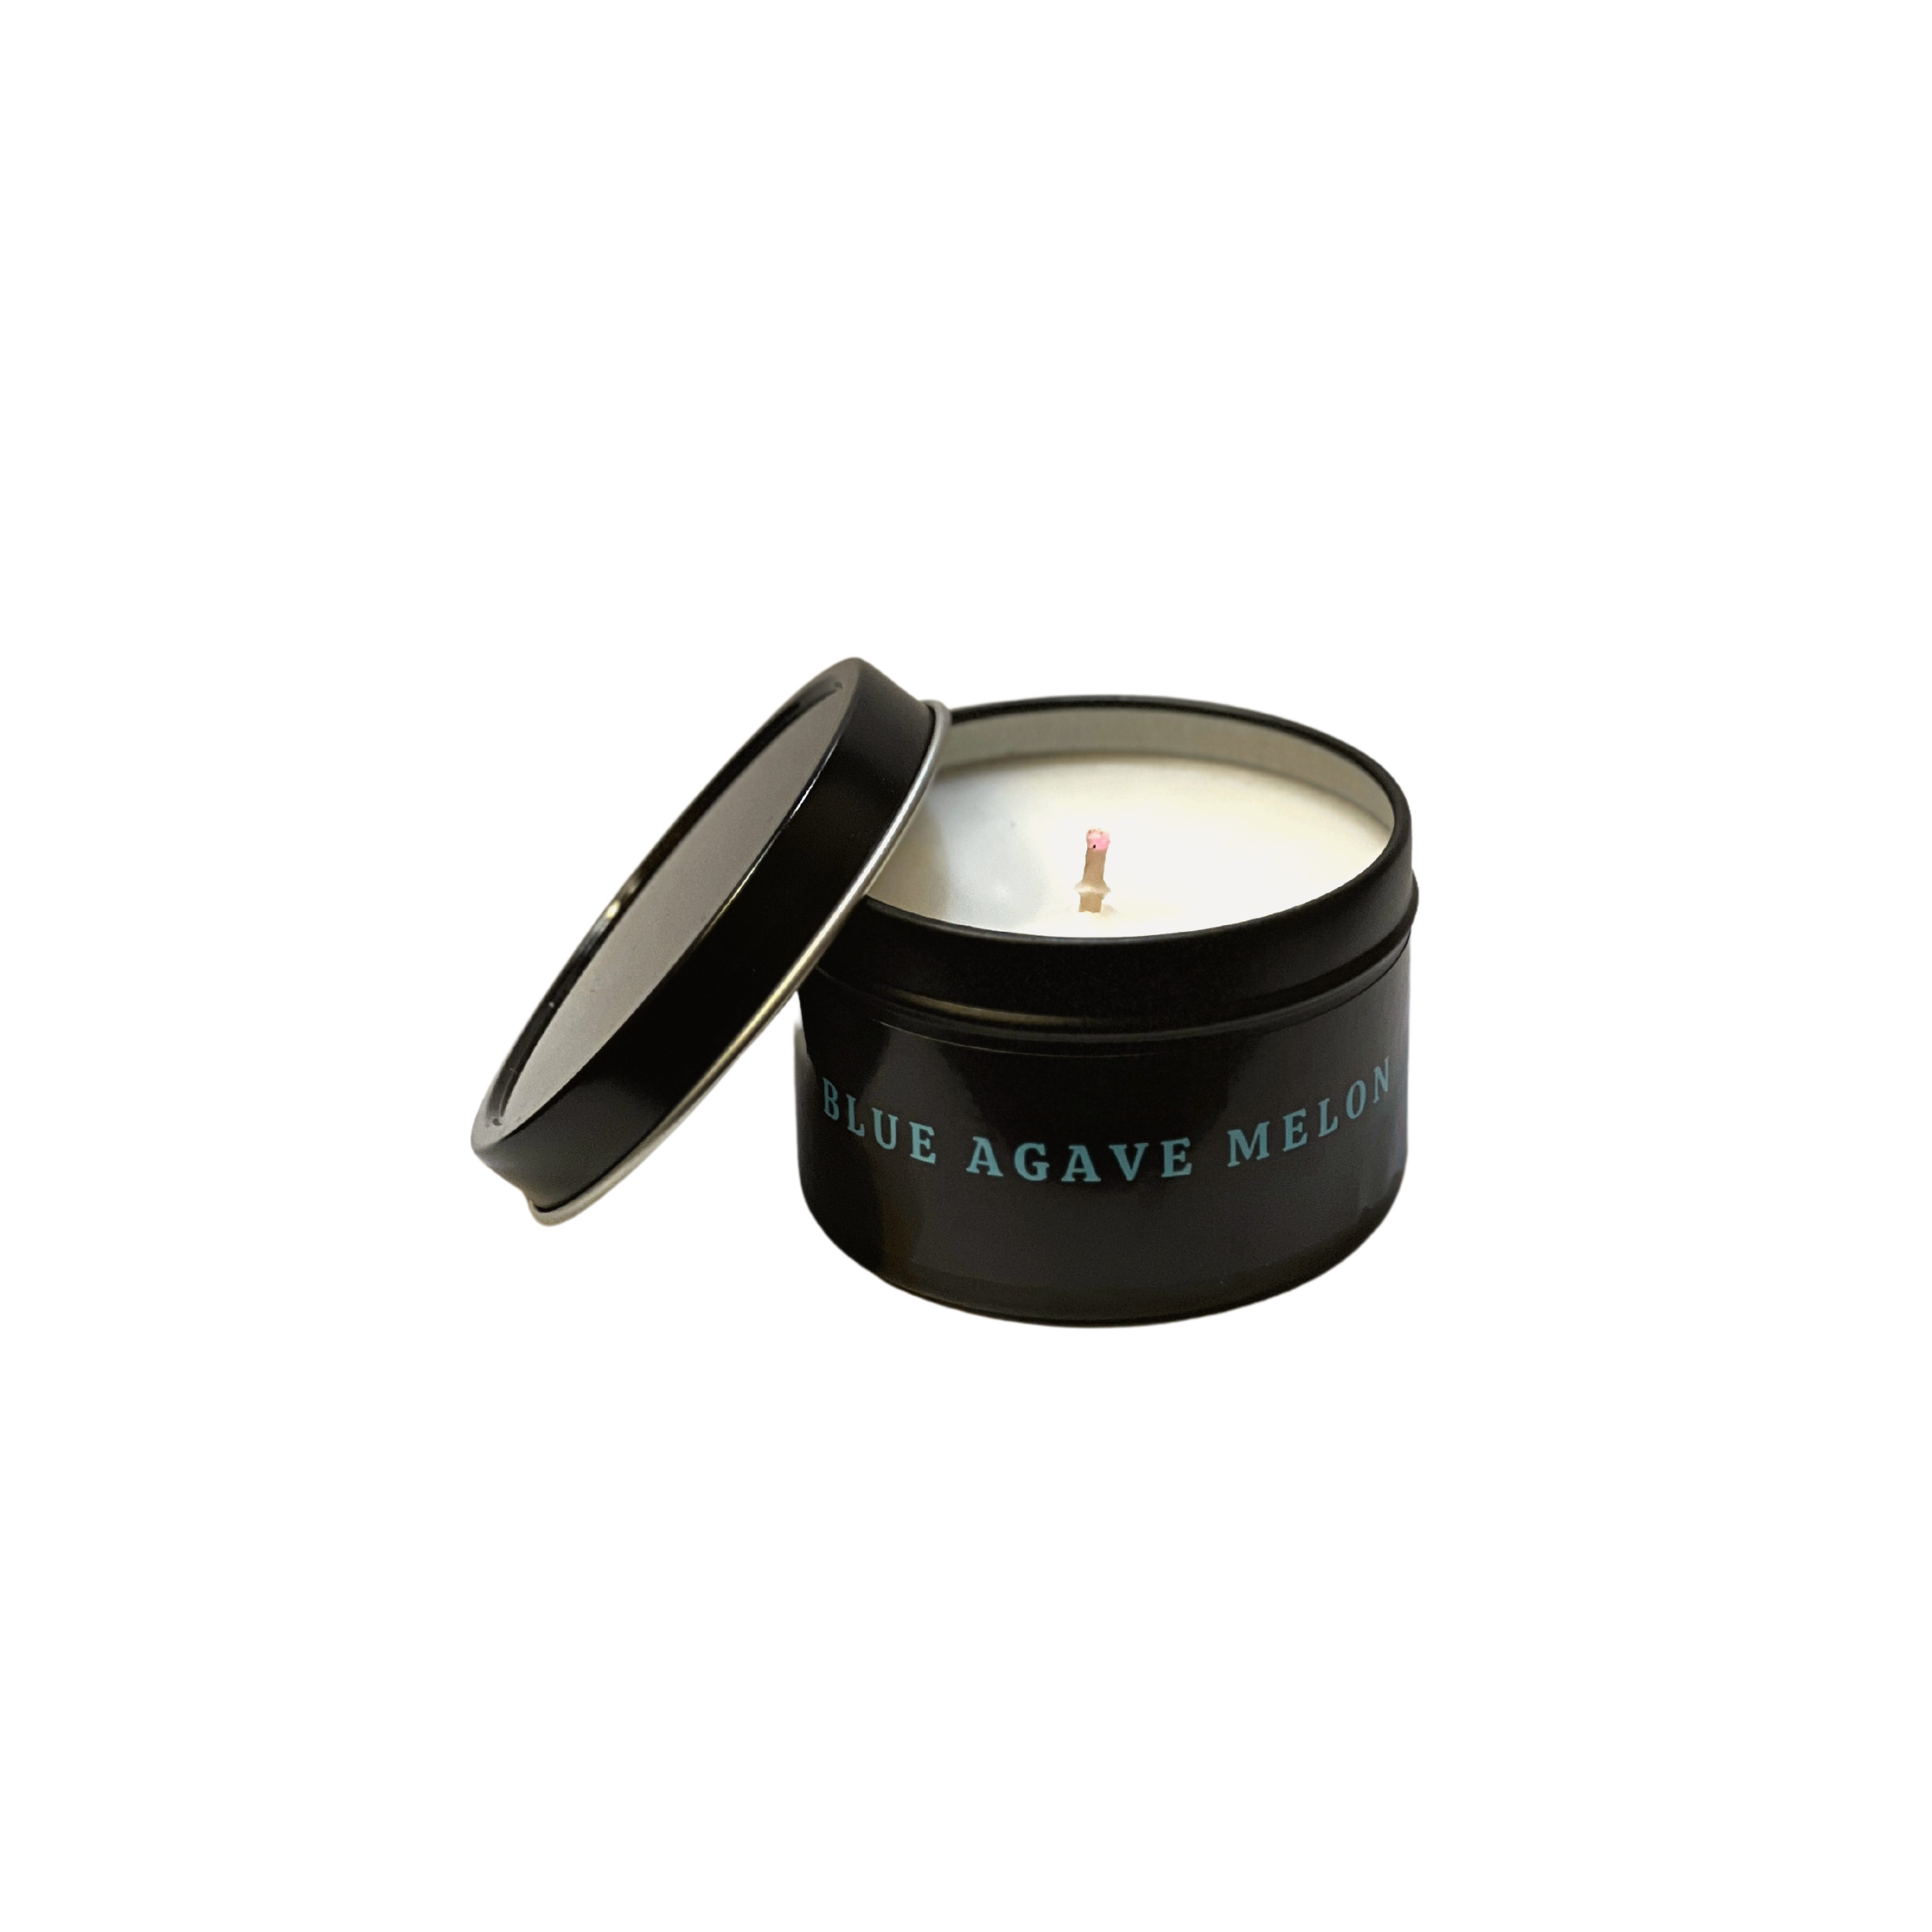 A black Travel Tins Spa Candle.